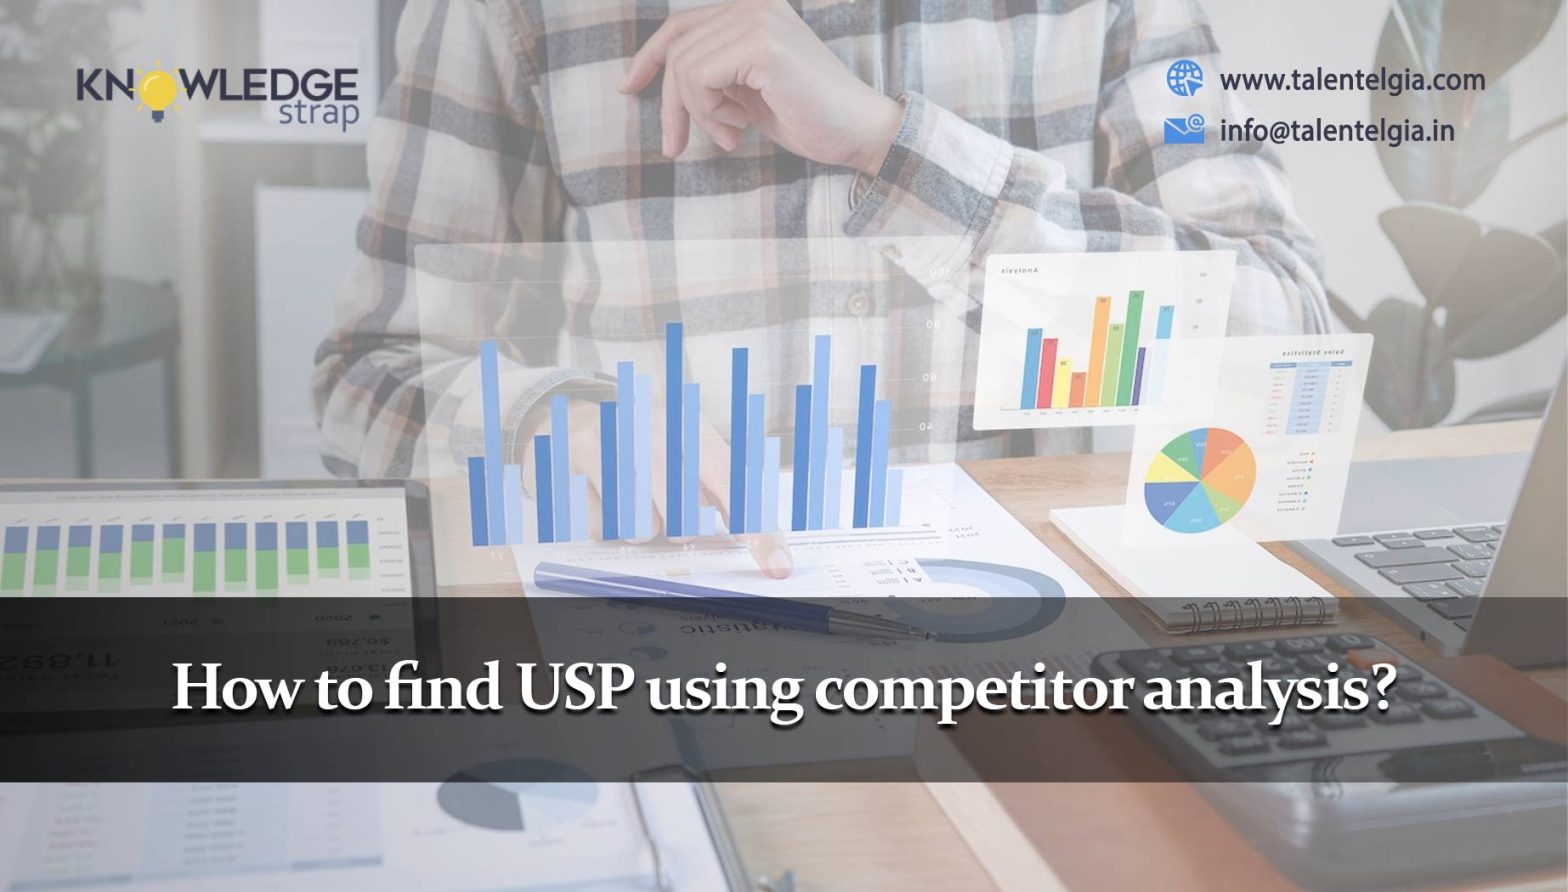 How to find USP using competitor analysis